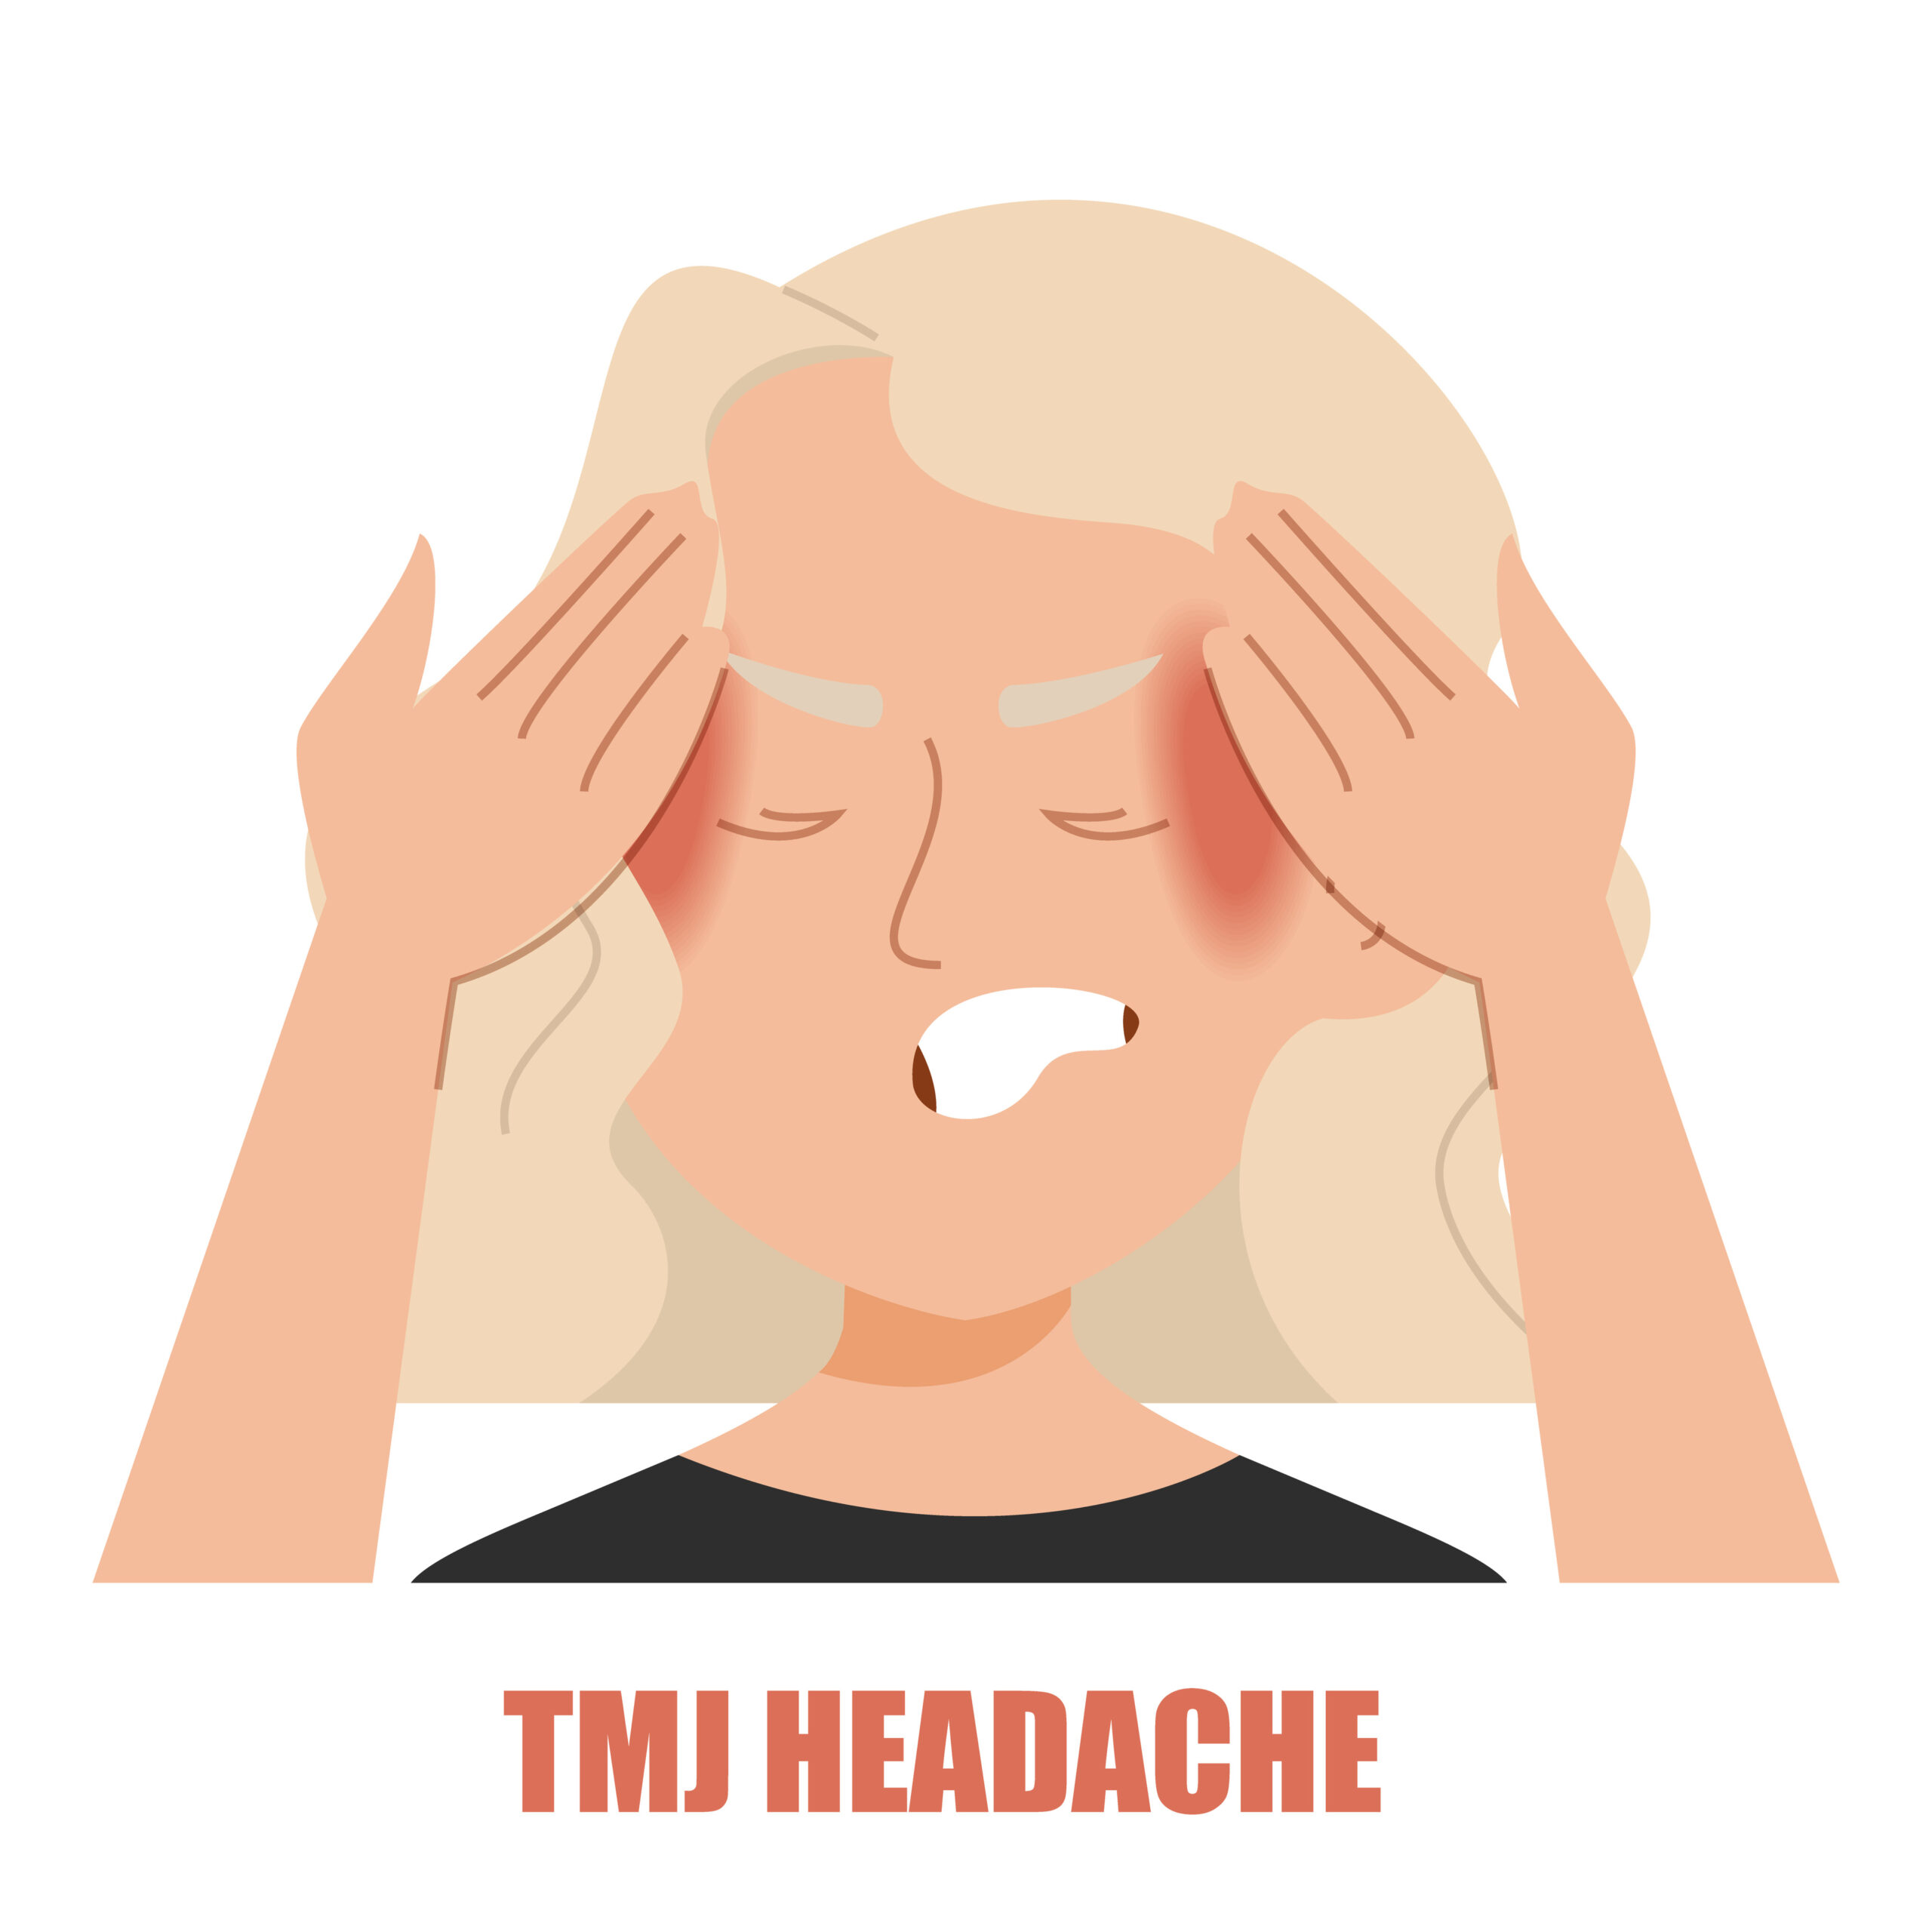 TMJ headache vector isolated. Illustration of a woman suffering from headache caused by TMJ disorder. Tension pain.